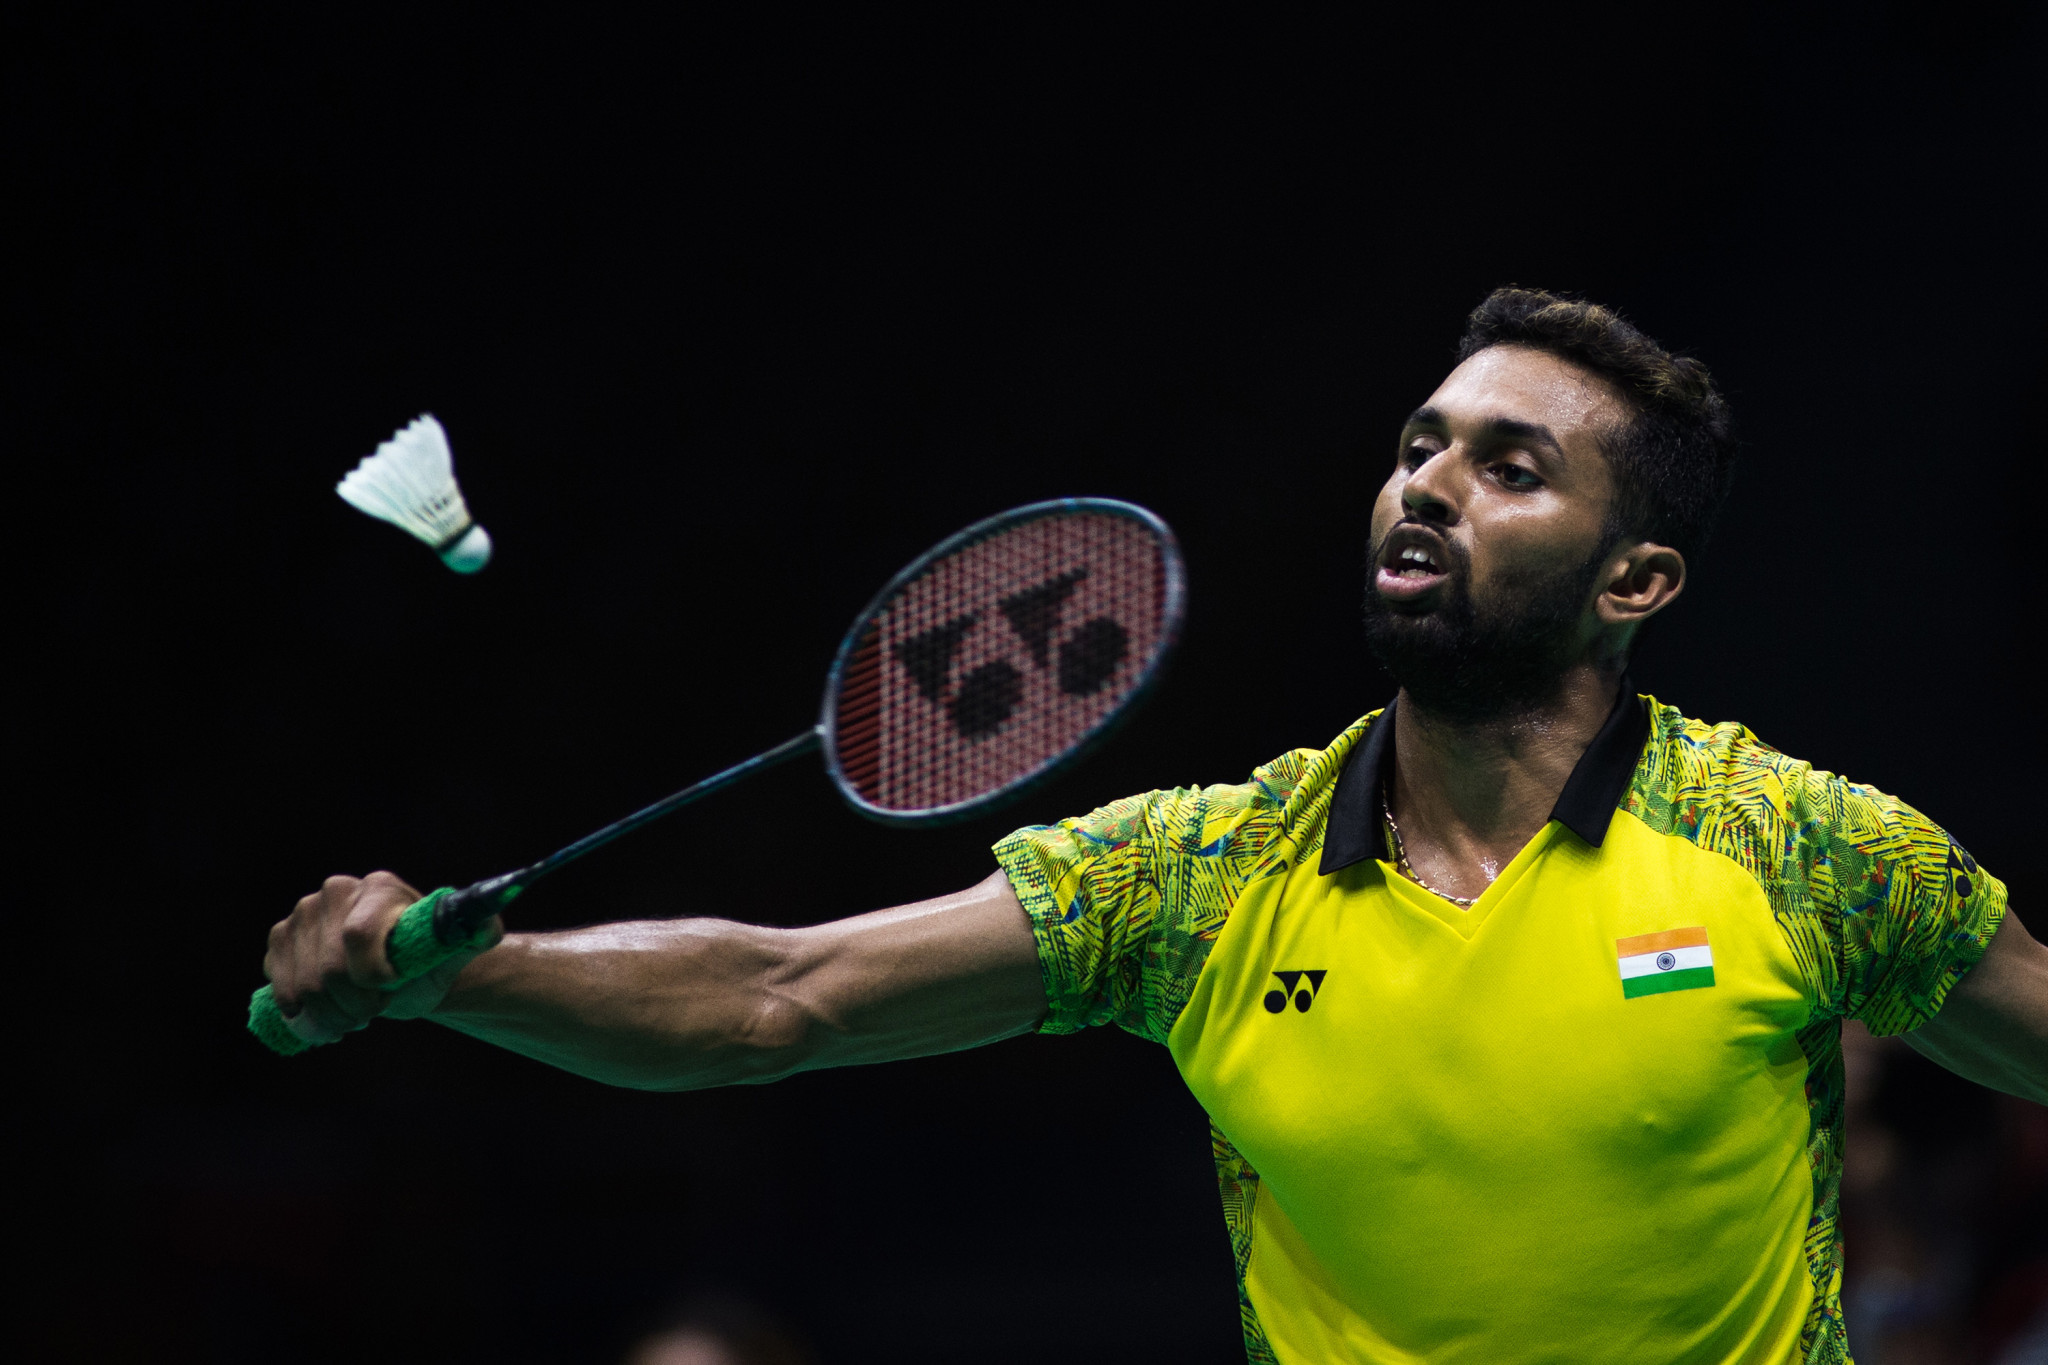 Top seed in the men's competition at the BWF Syed Modi International, Prannoy Kumar, suffered a shock exit in the first round ©Getty Images